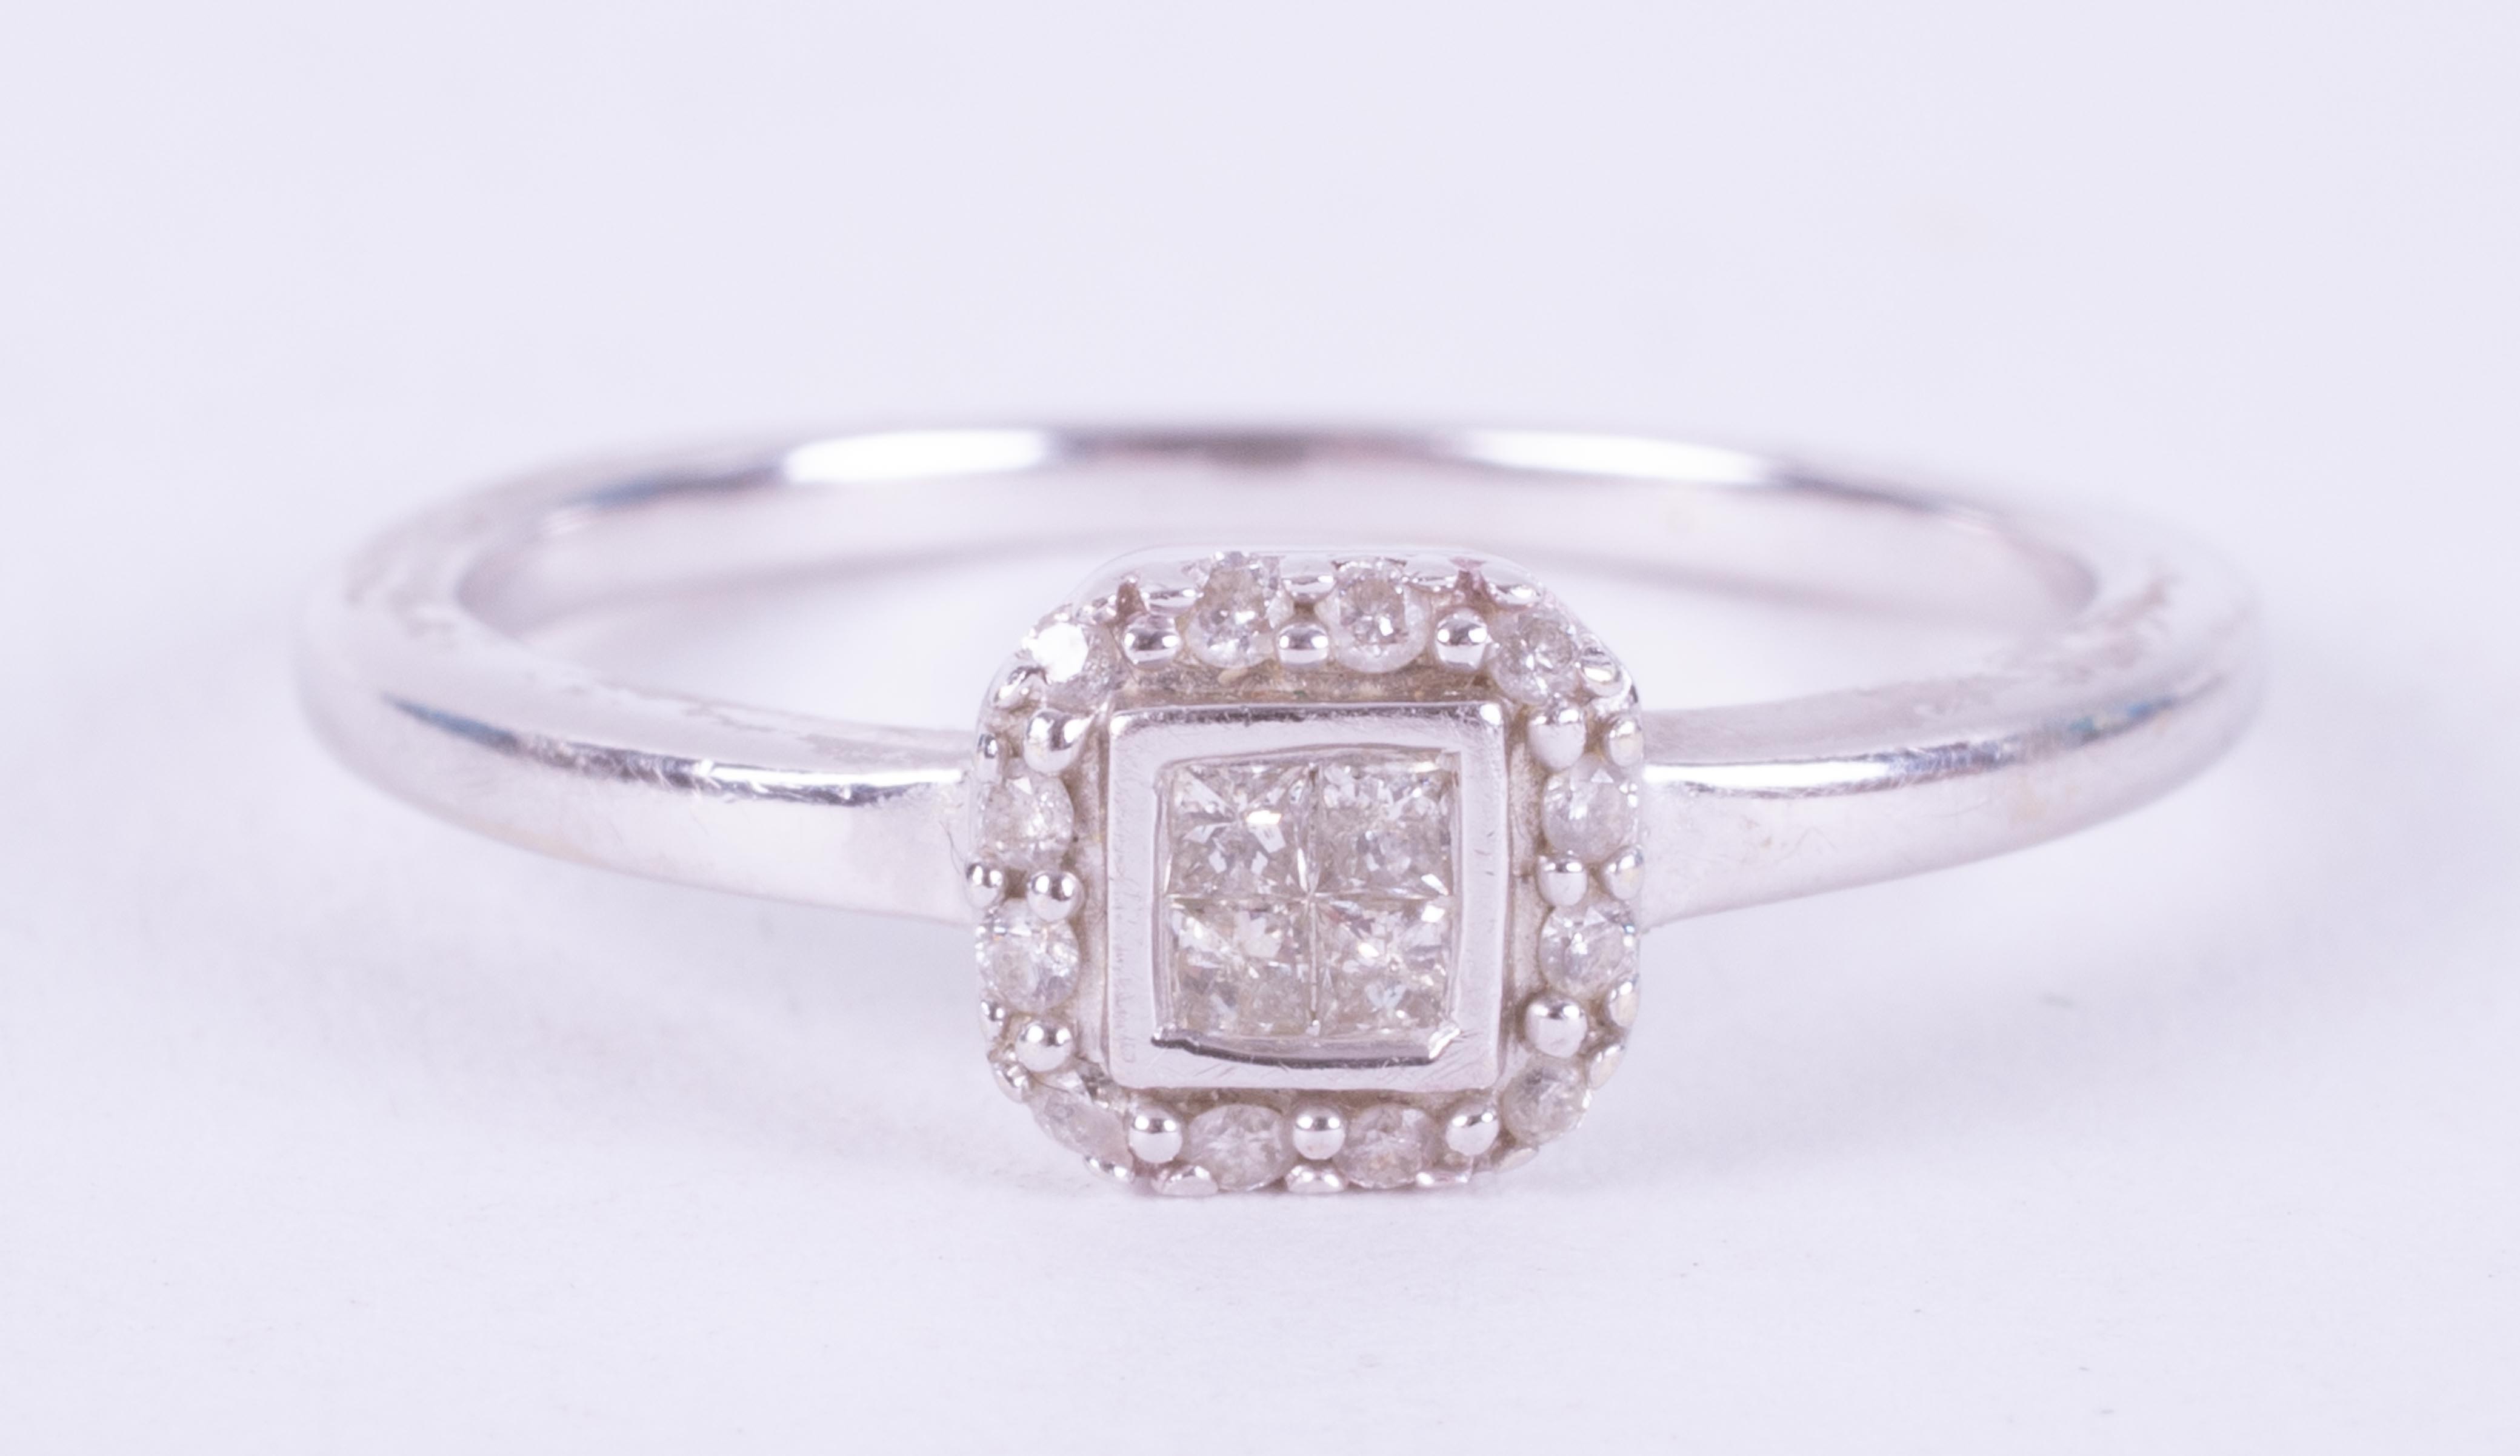 A 9ct white gold square cluster style ring set with a mixture of princess cut and round brilliant